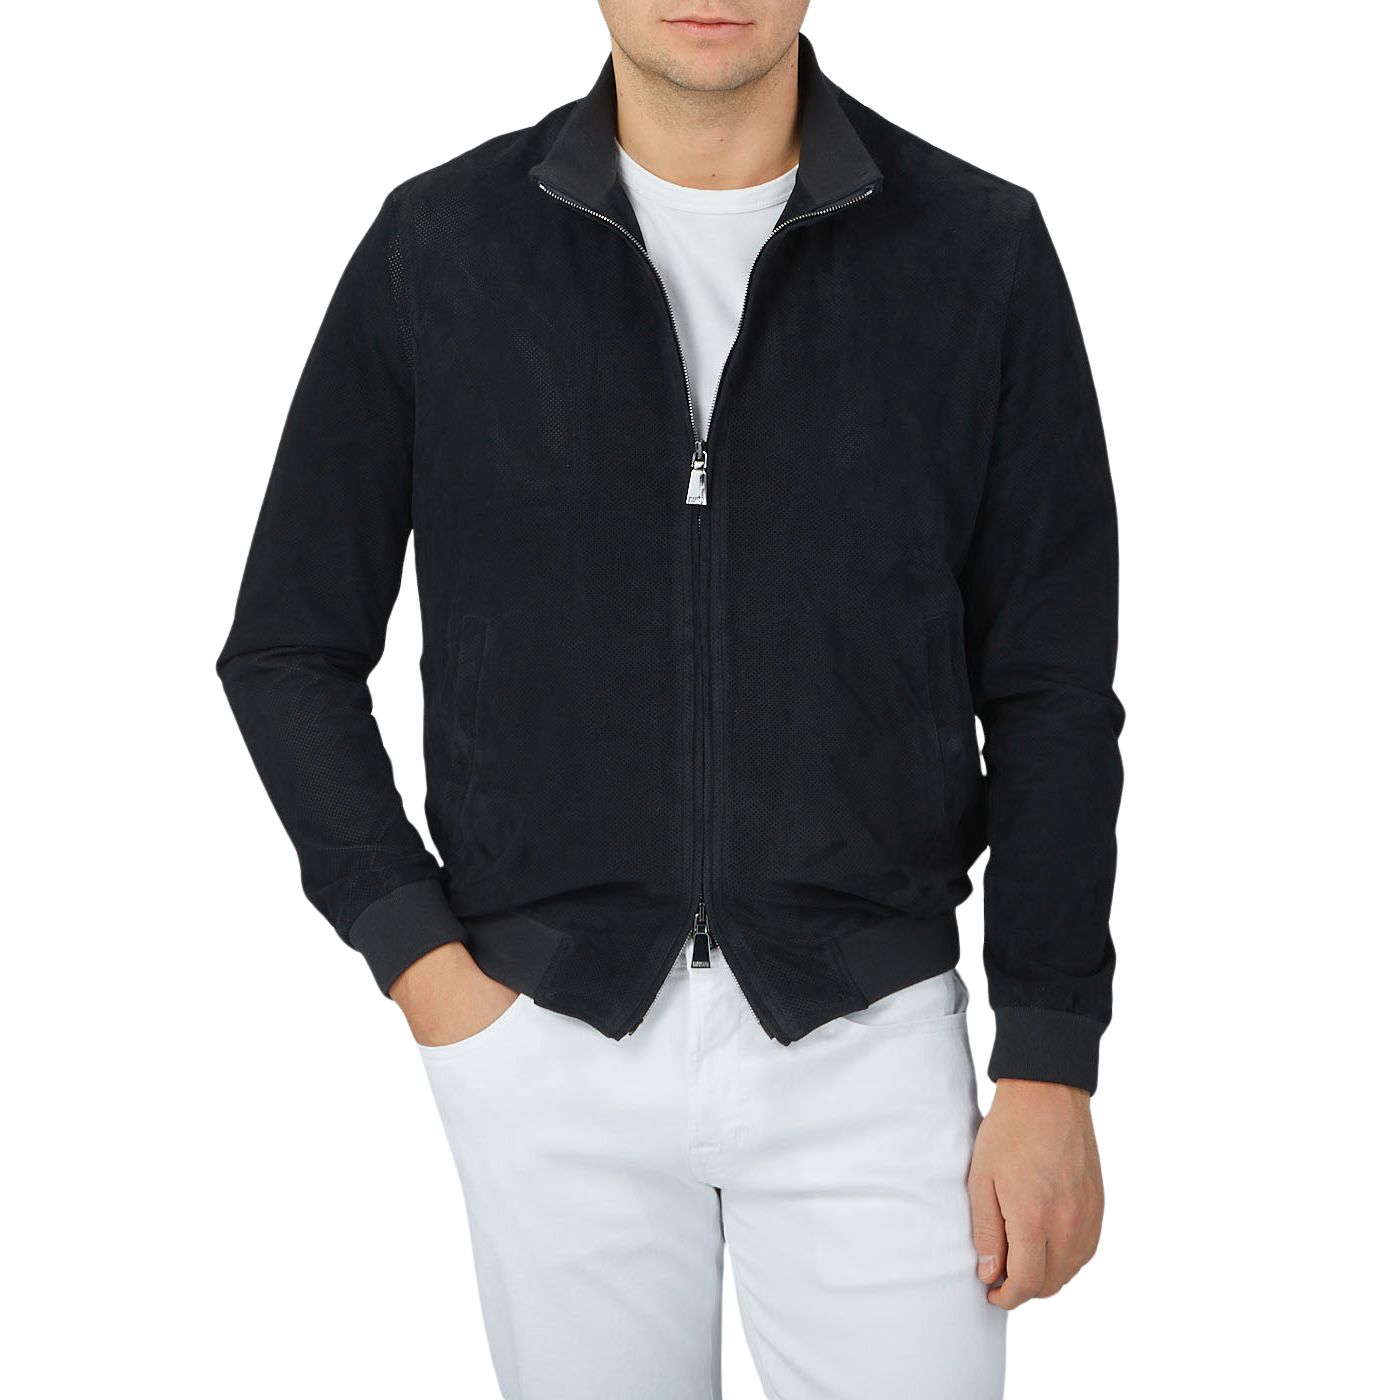 A man wearing a luxurious Manto Navy Blue Perforated Suede Leather Blouson jacket and white pants.